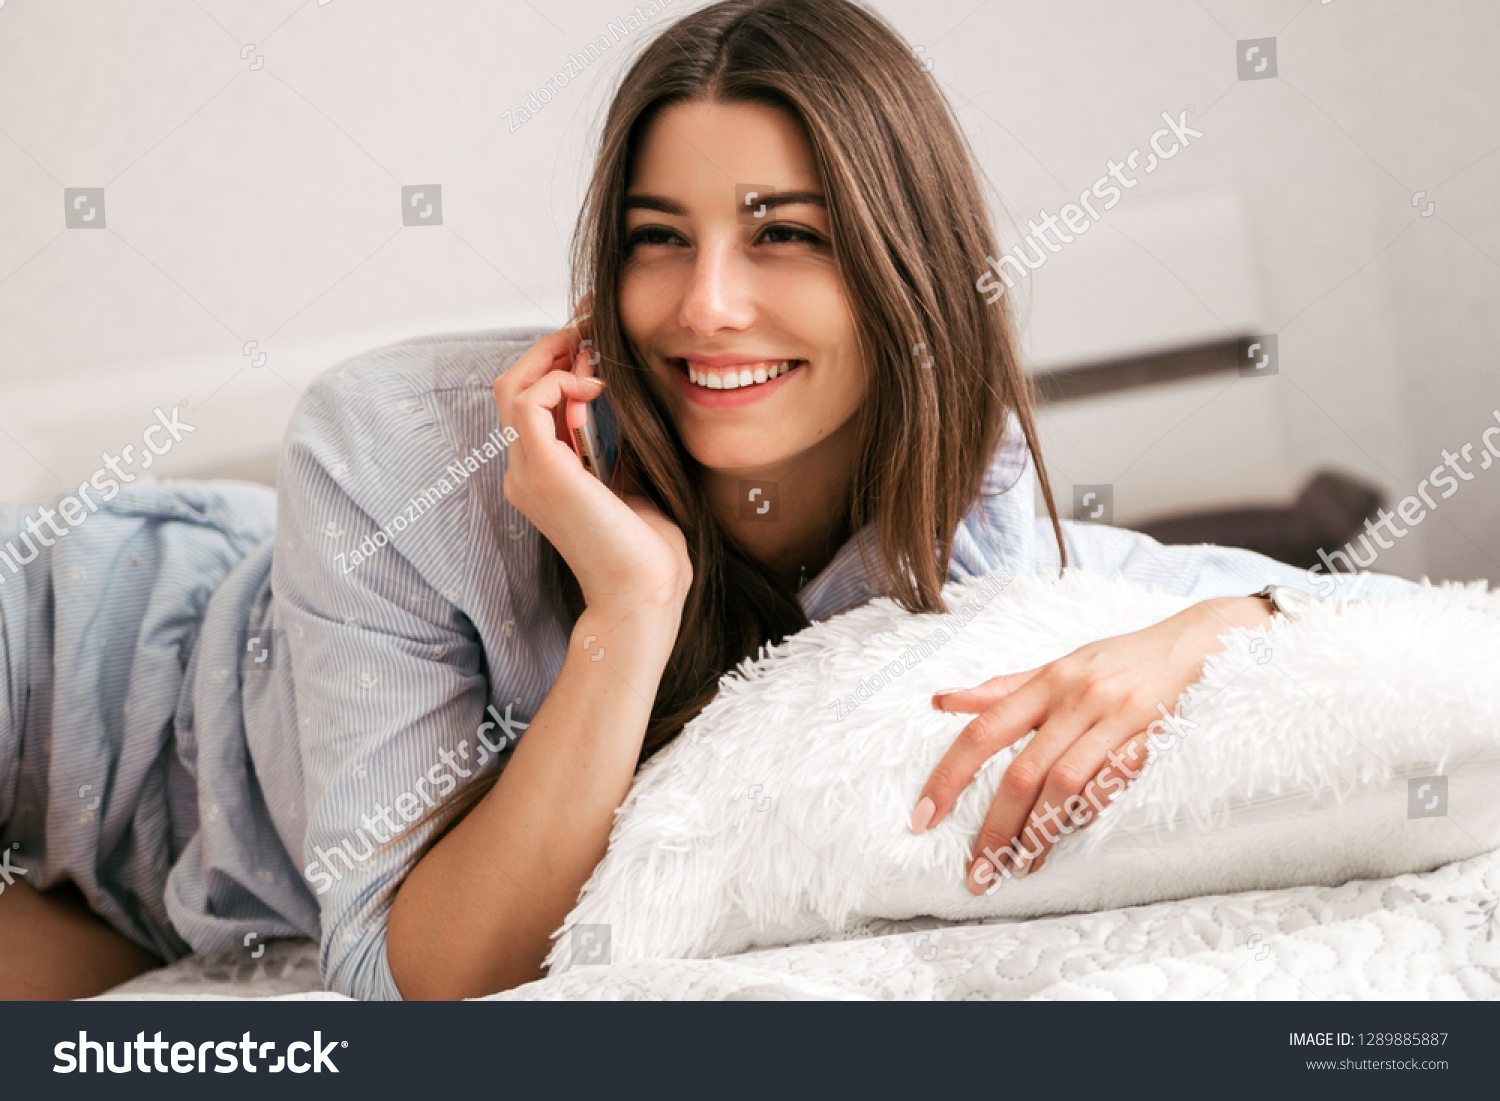 Young smiling woman lying in white bed and using a phone in her bedroom. Happy morning. #1289885887